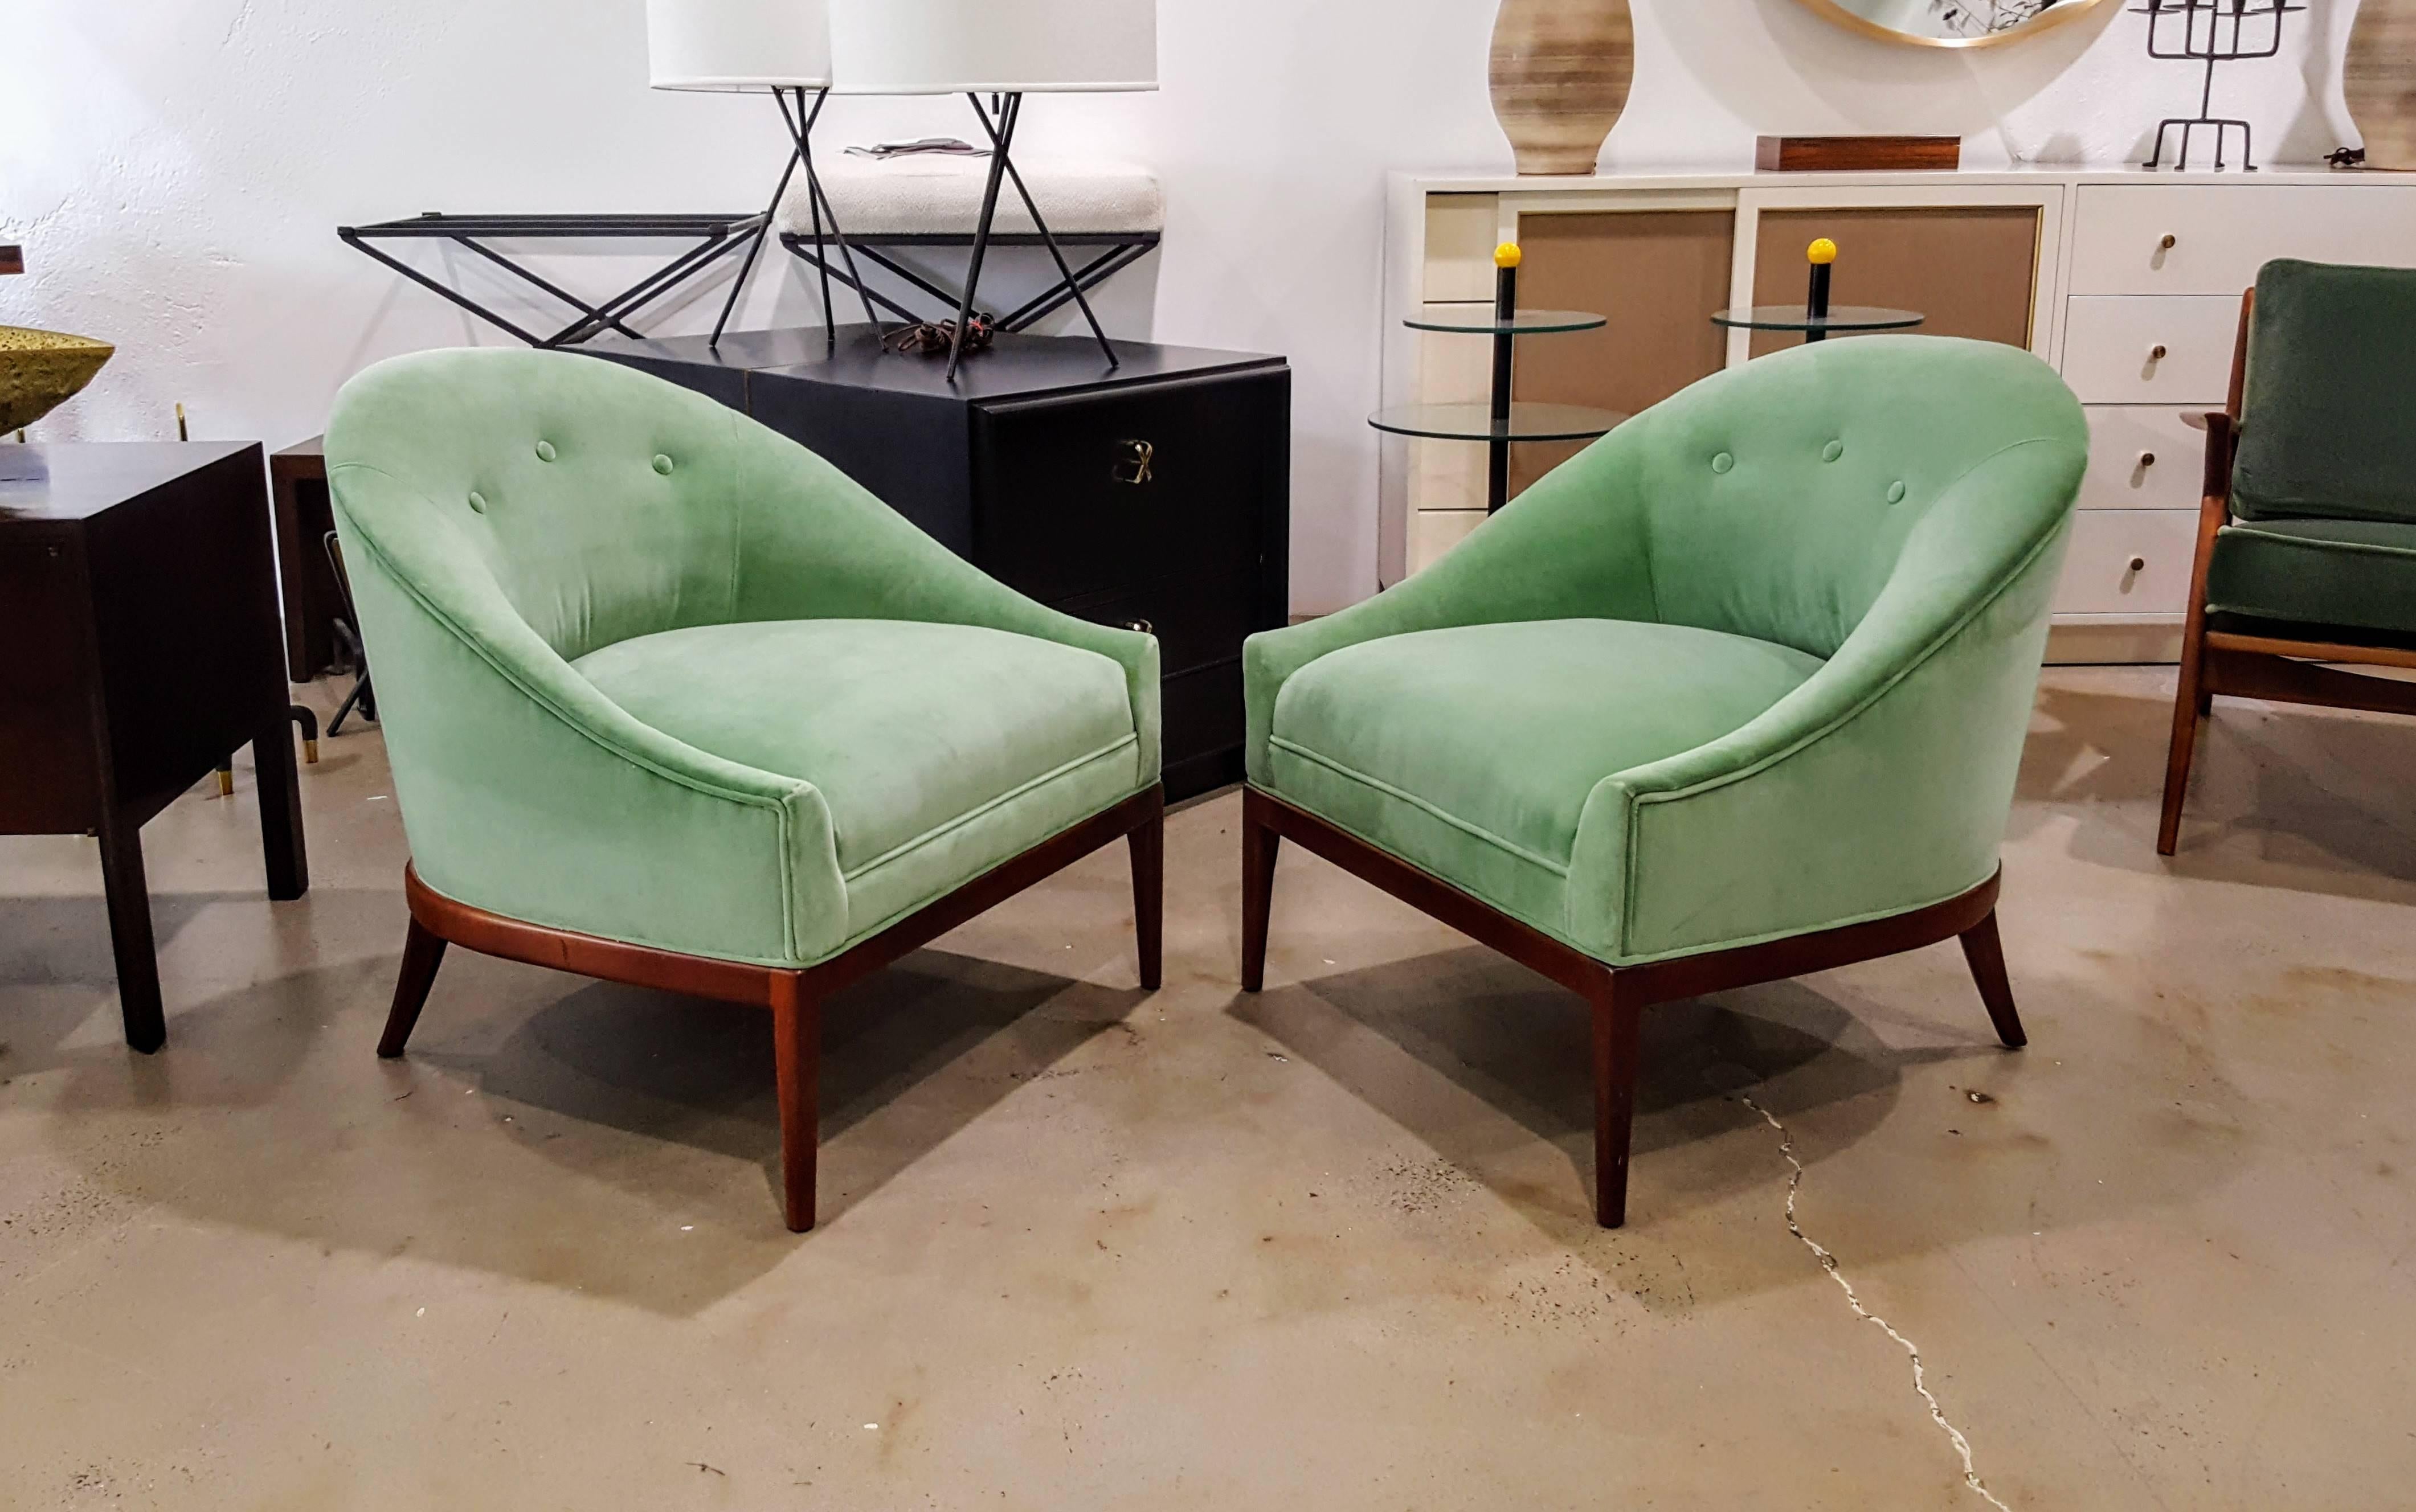 Pair of modern slipper chairs in new celadon green velvet, 1960s. In the style of Harvey Probber.

See this item in our private NYC showroom! Refine Limited is located in the heart of Chelsea at the history Starrett-LeHigh Building, 601 West 26th